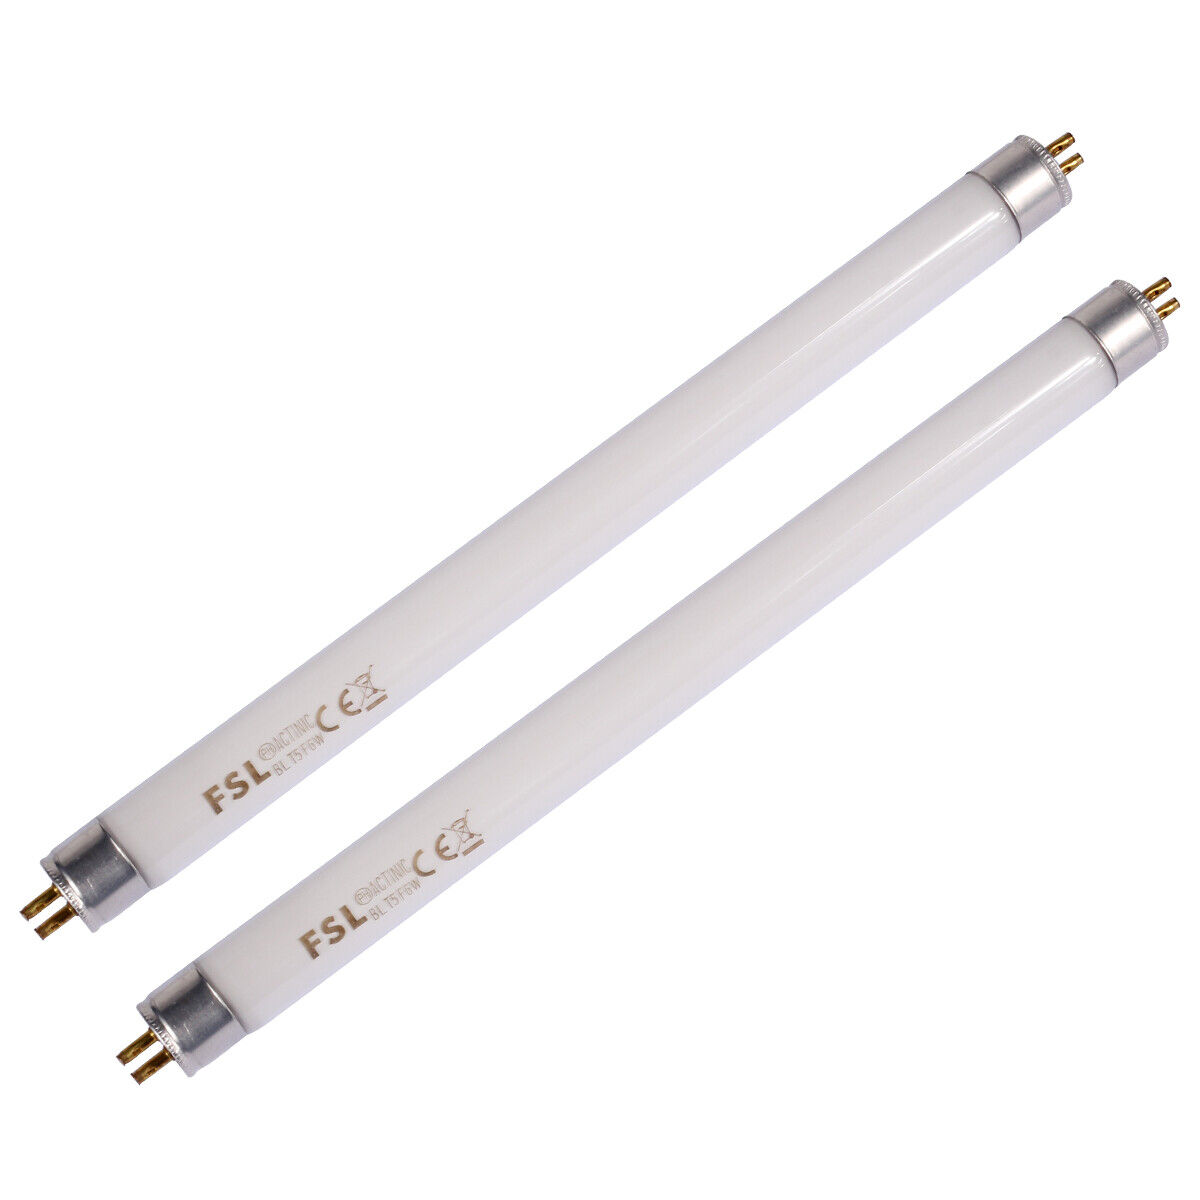 Replacement Light Bulbs UV Tube Lamp Light For Insect Zapper 6 /9 / 10 /15W /20W